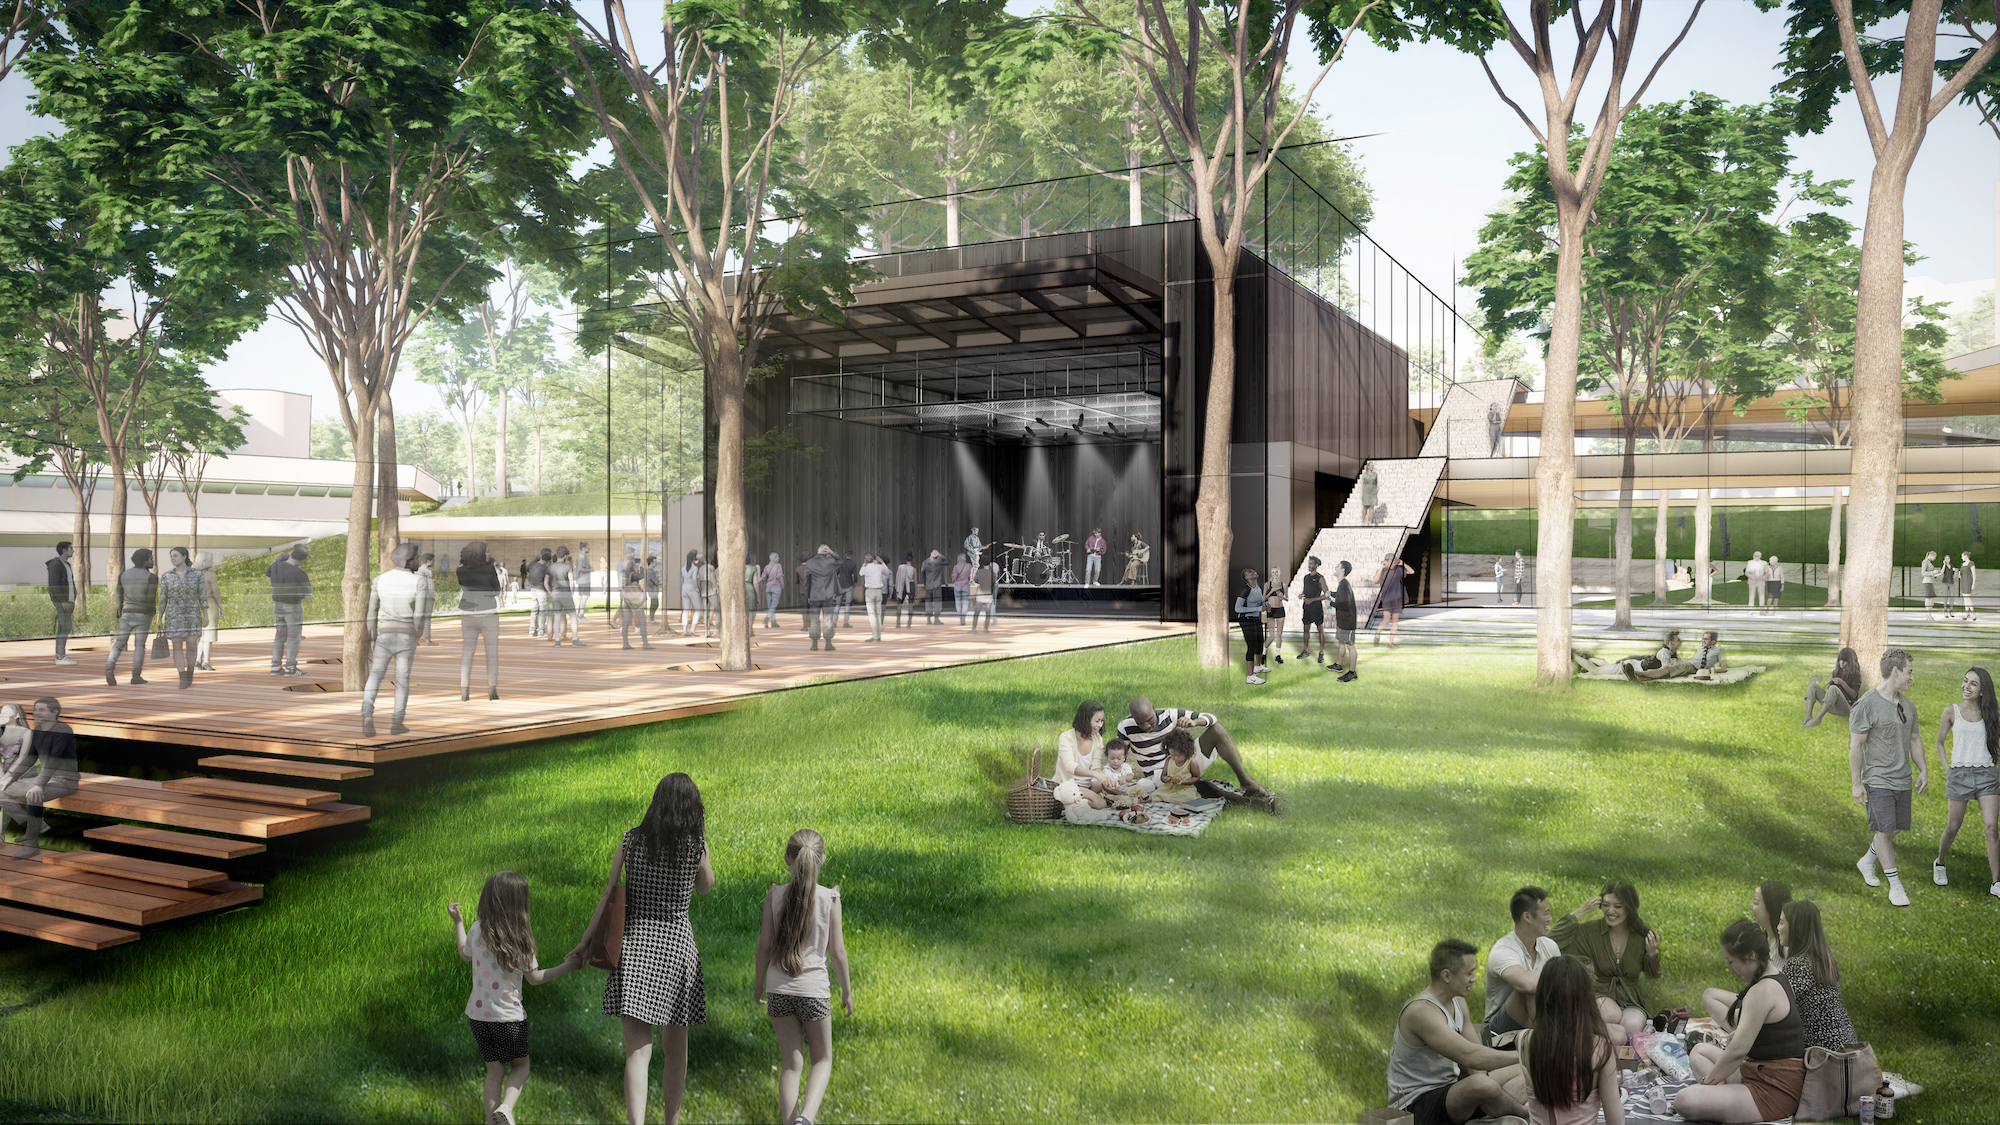 Kalita Humphreys Theater Black box theater and deck, view from west. Rendering Diller Scofidio + Renfro